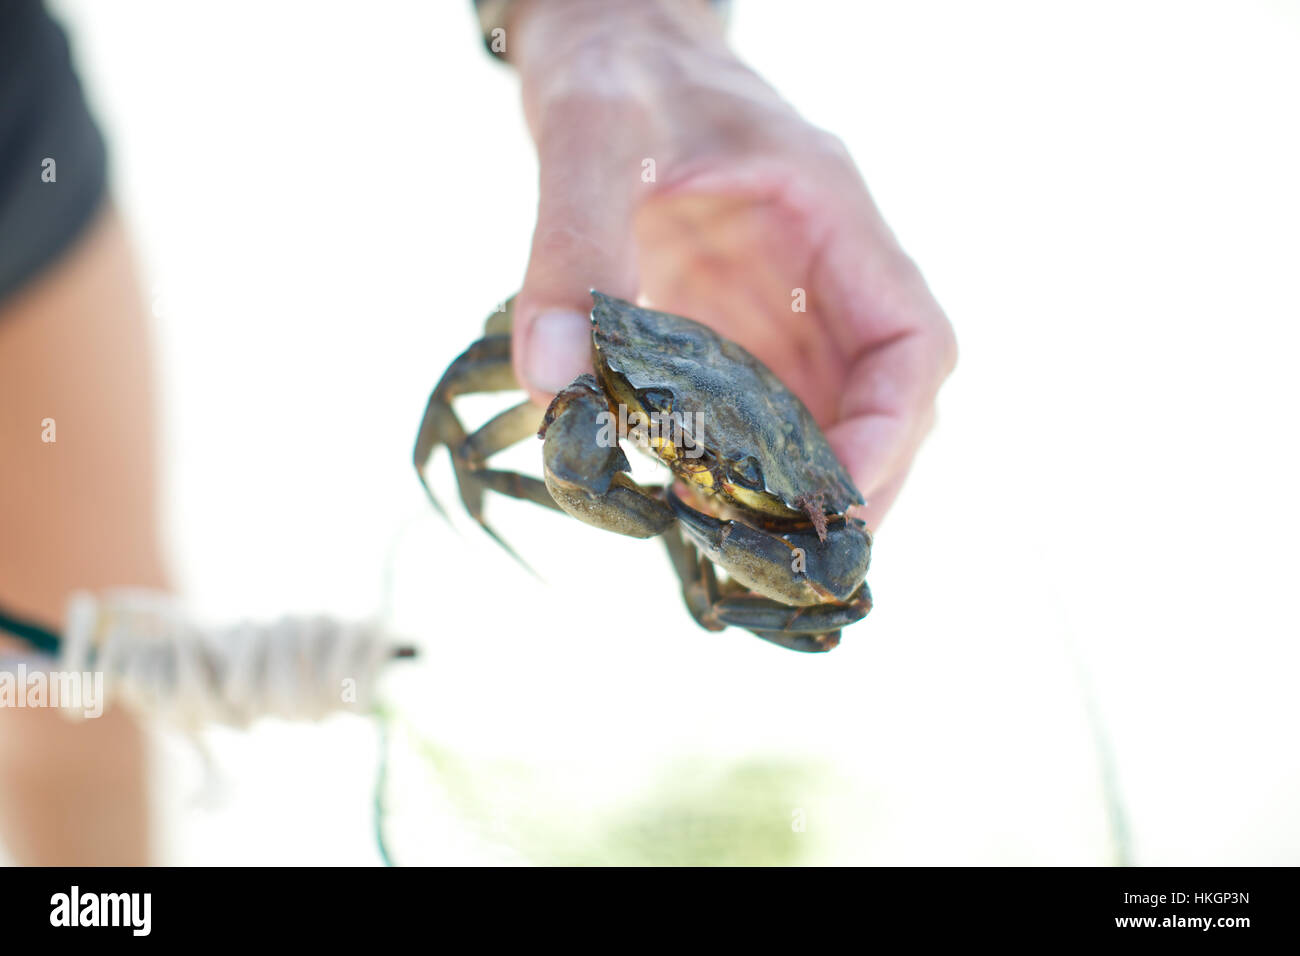 hand holding crab. creature, seafood, claw, food. Stock Photo